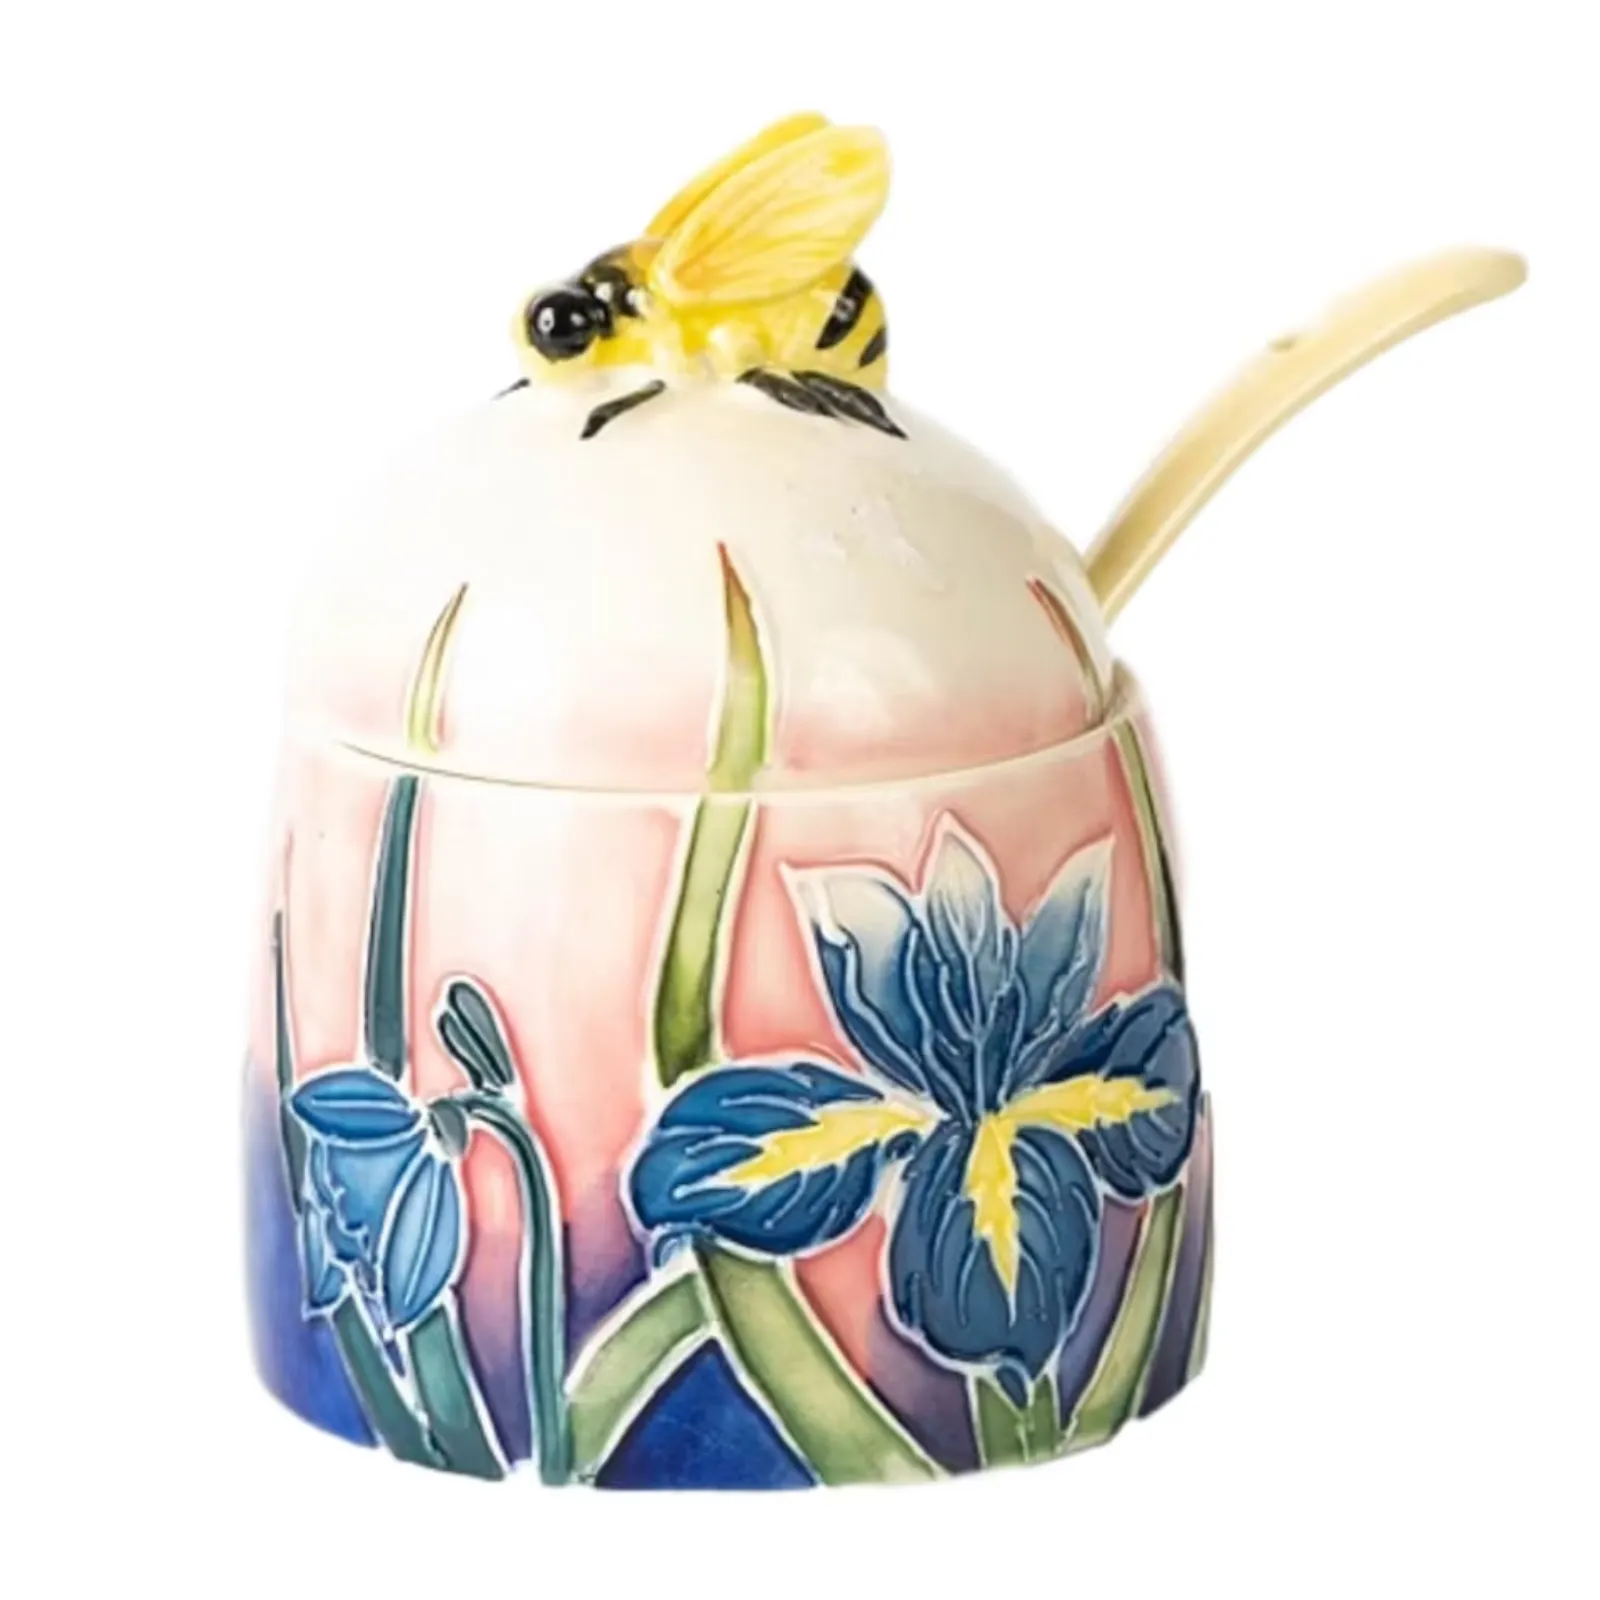 Small honey jar with bold blue iris flower, bee on lid and spoon included